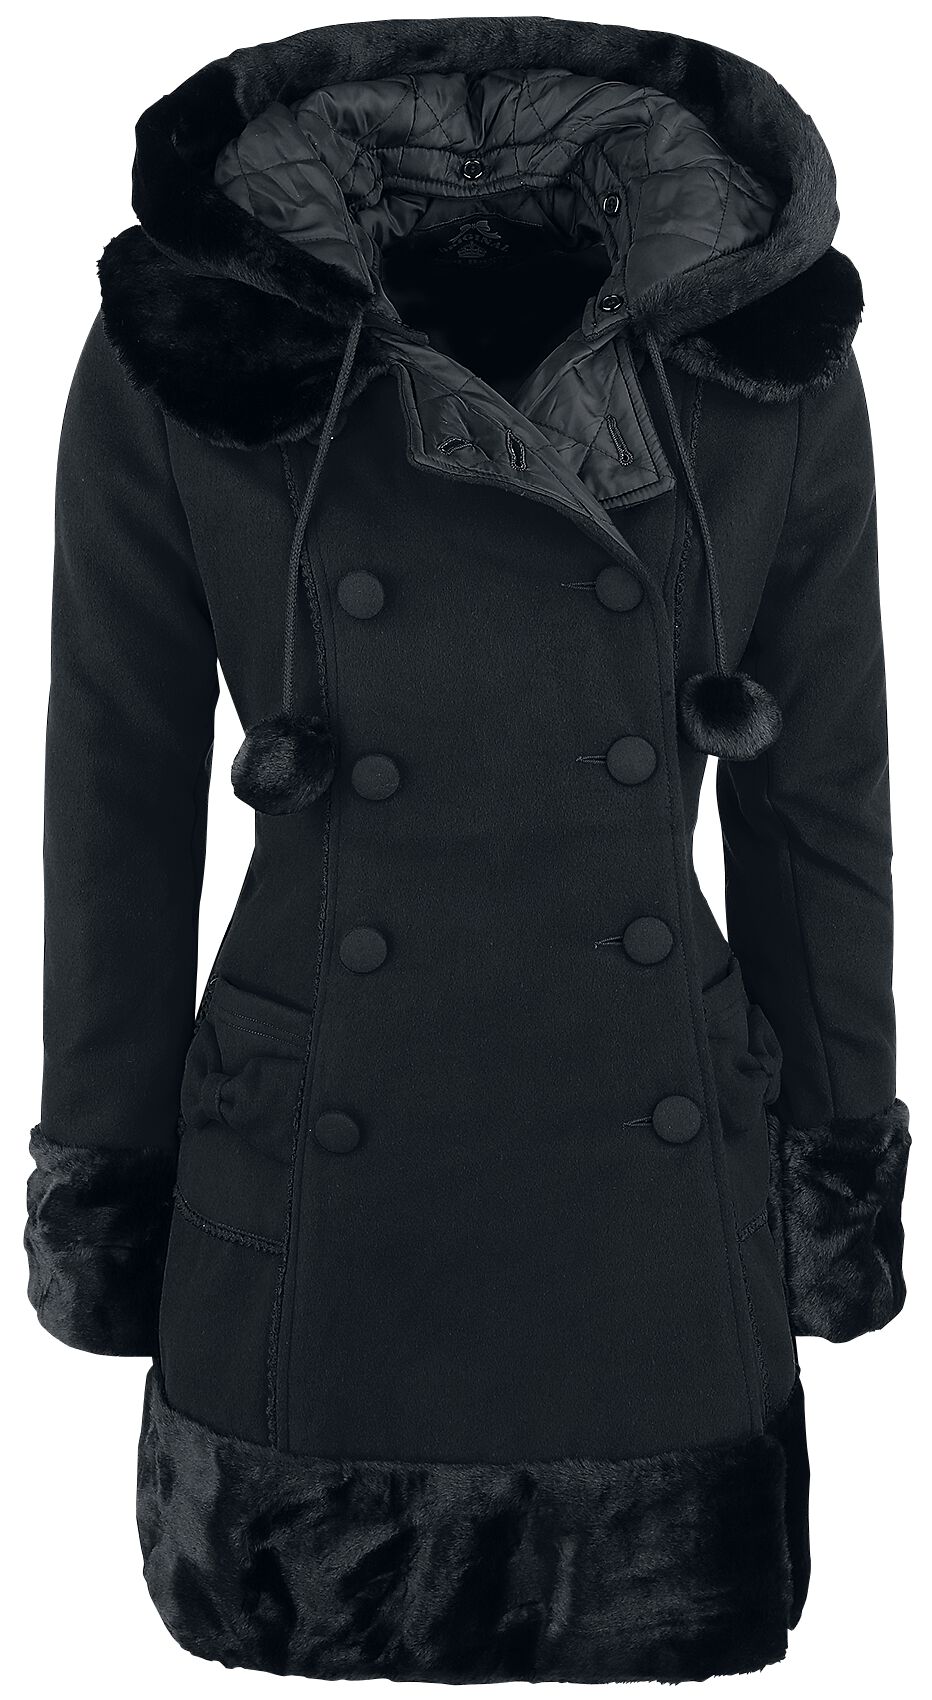 Image of Cappotto invernale Rockabilly di Hell Bunny - Sarah Jane Coat - XS a 4XL - Donna - nero